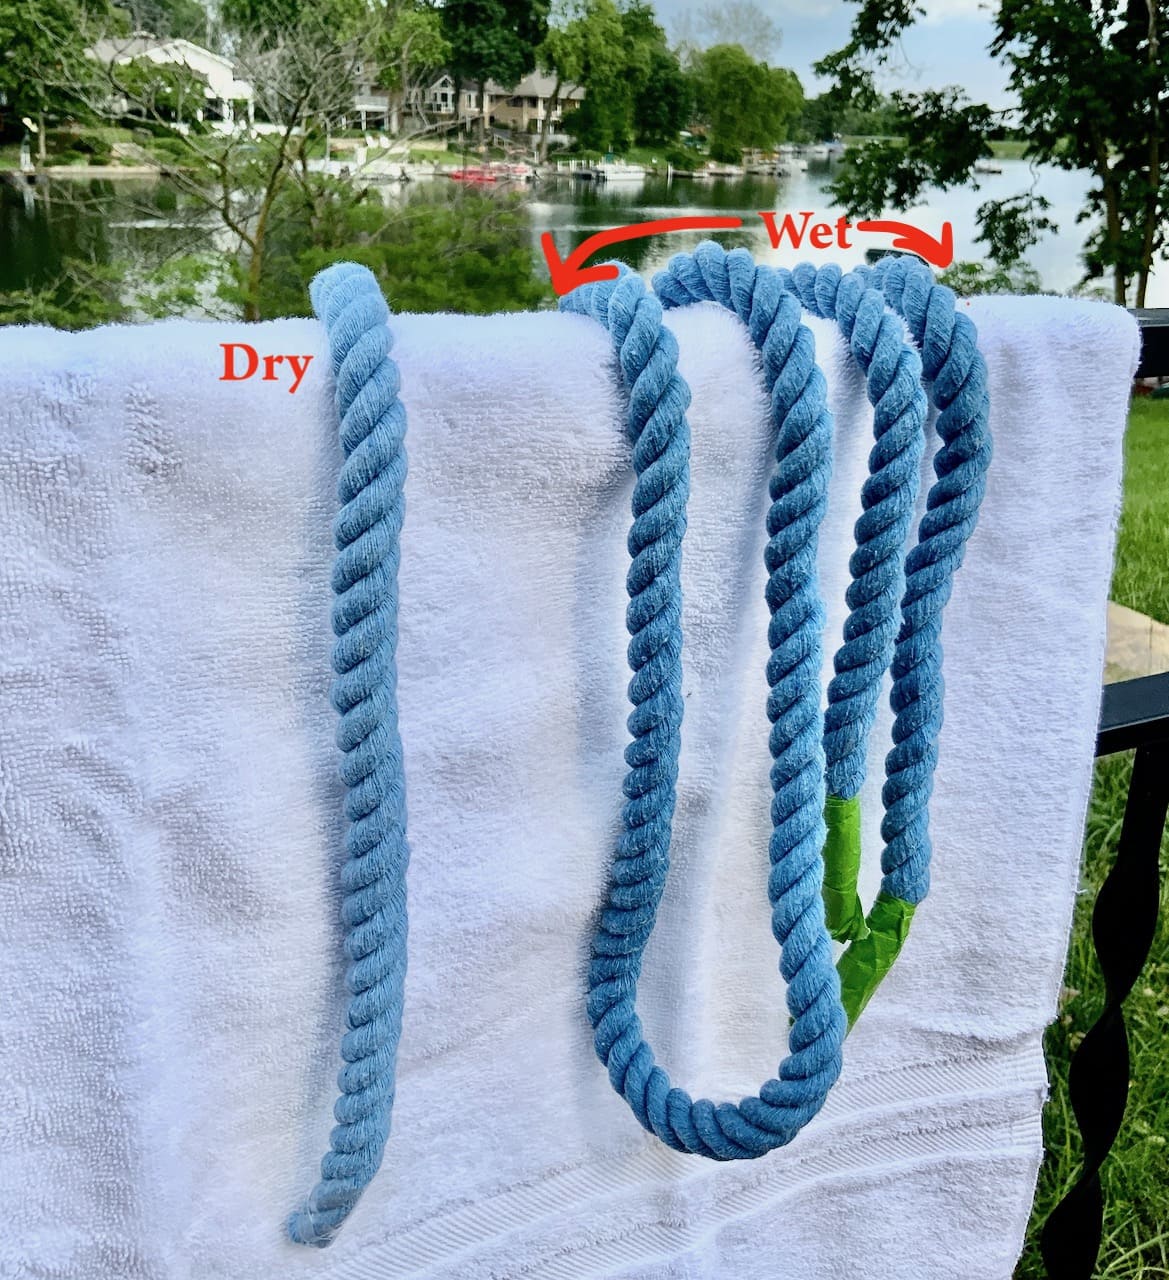 a length of dry dyed rope is shown next to several wet lengths of the dyed rope on a towel hung over a fence